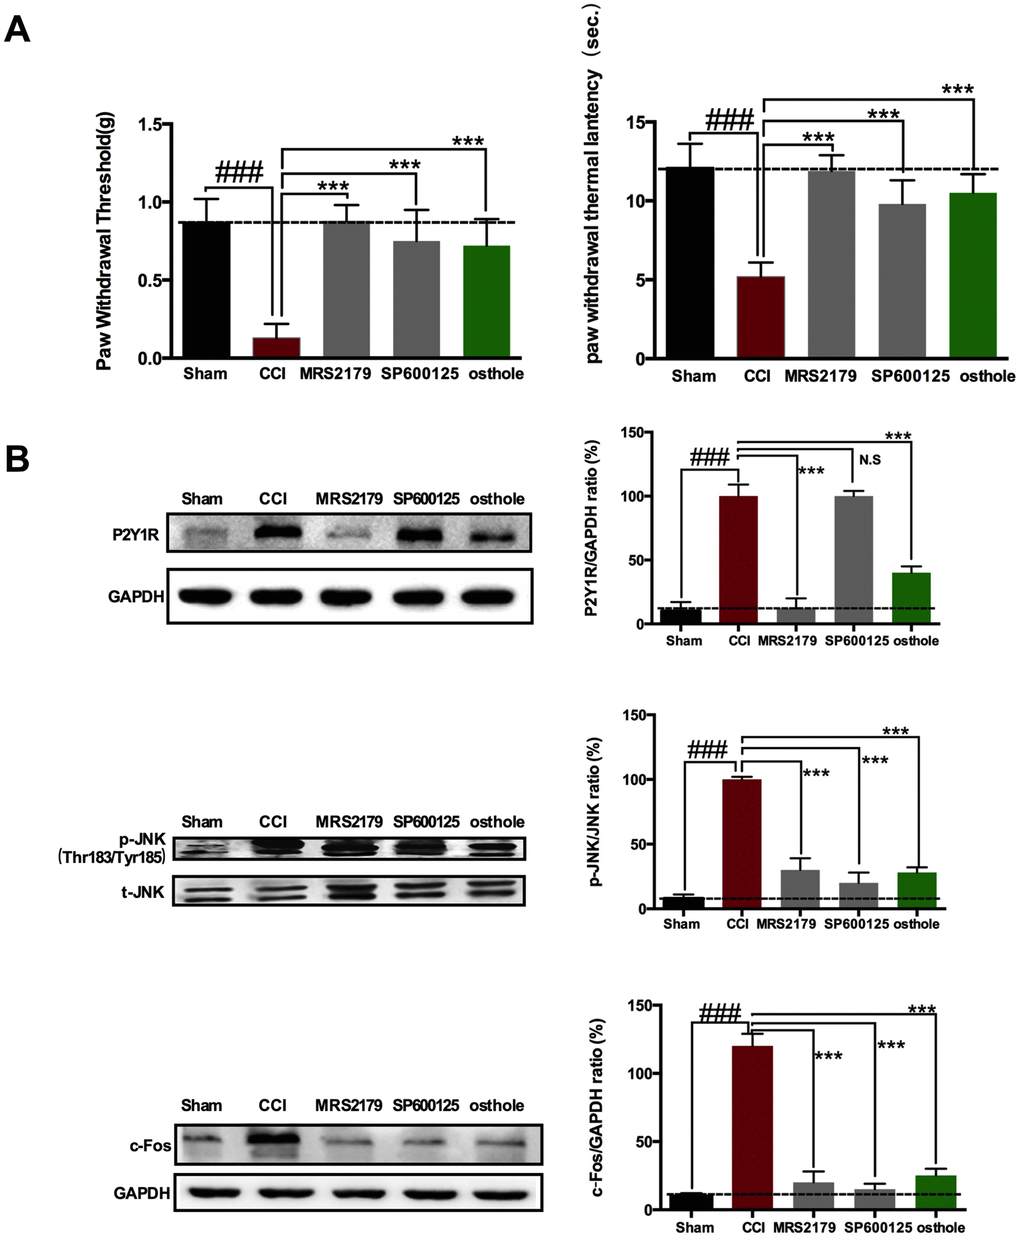 P2Y1 receptor-dependent JNK signaling pathway in spinal astrocyte was involved in pain relief after osthole treatment. (A) Single injection MRS2179, SP600125 and osthole all seriously changed the CCI-induced mechanical allodynia and heat hyperalgesia. (B) The effect of MRS2179, SP600125 and osthole on P2Y1R, p-JNK and c-Fos expression compared to CCI group. ###pp